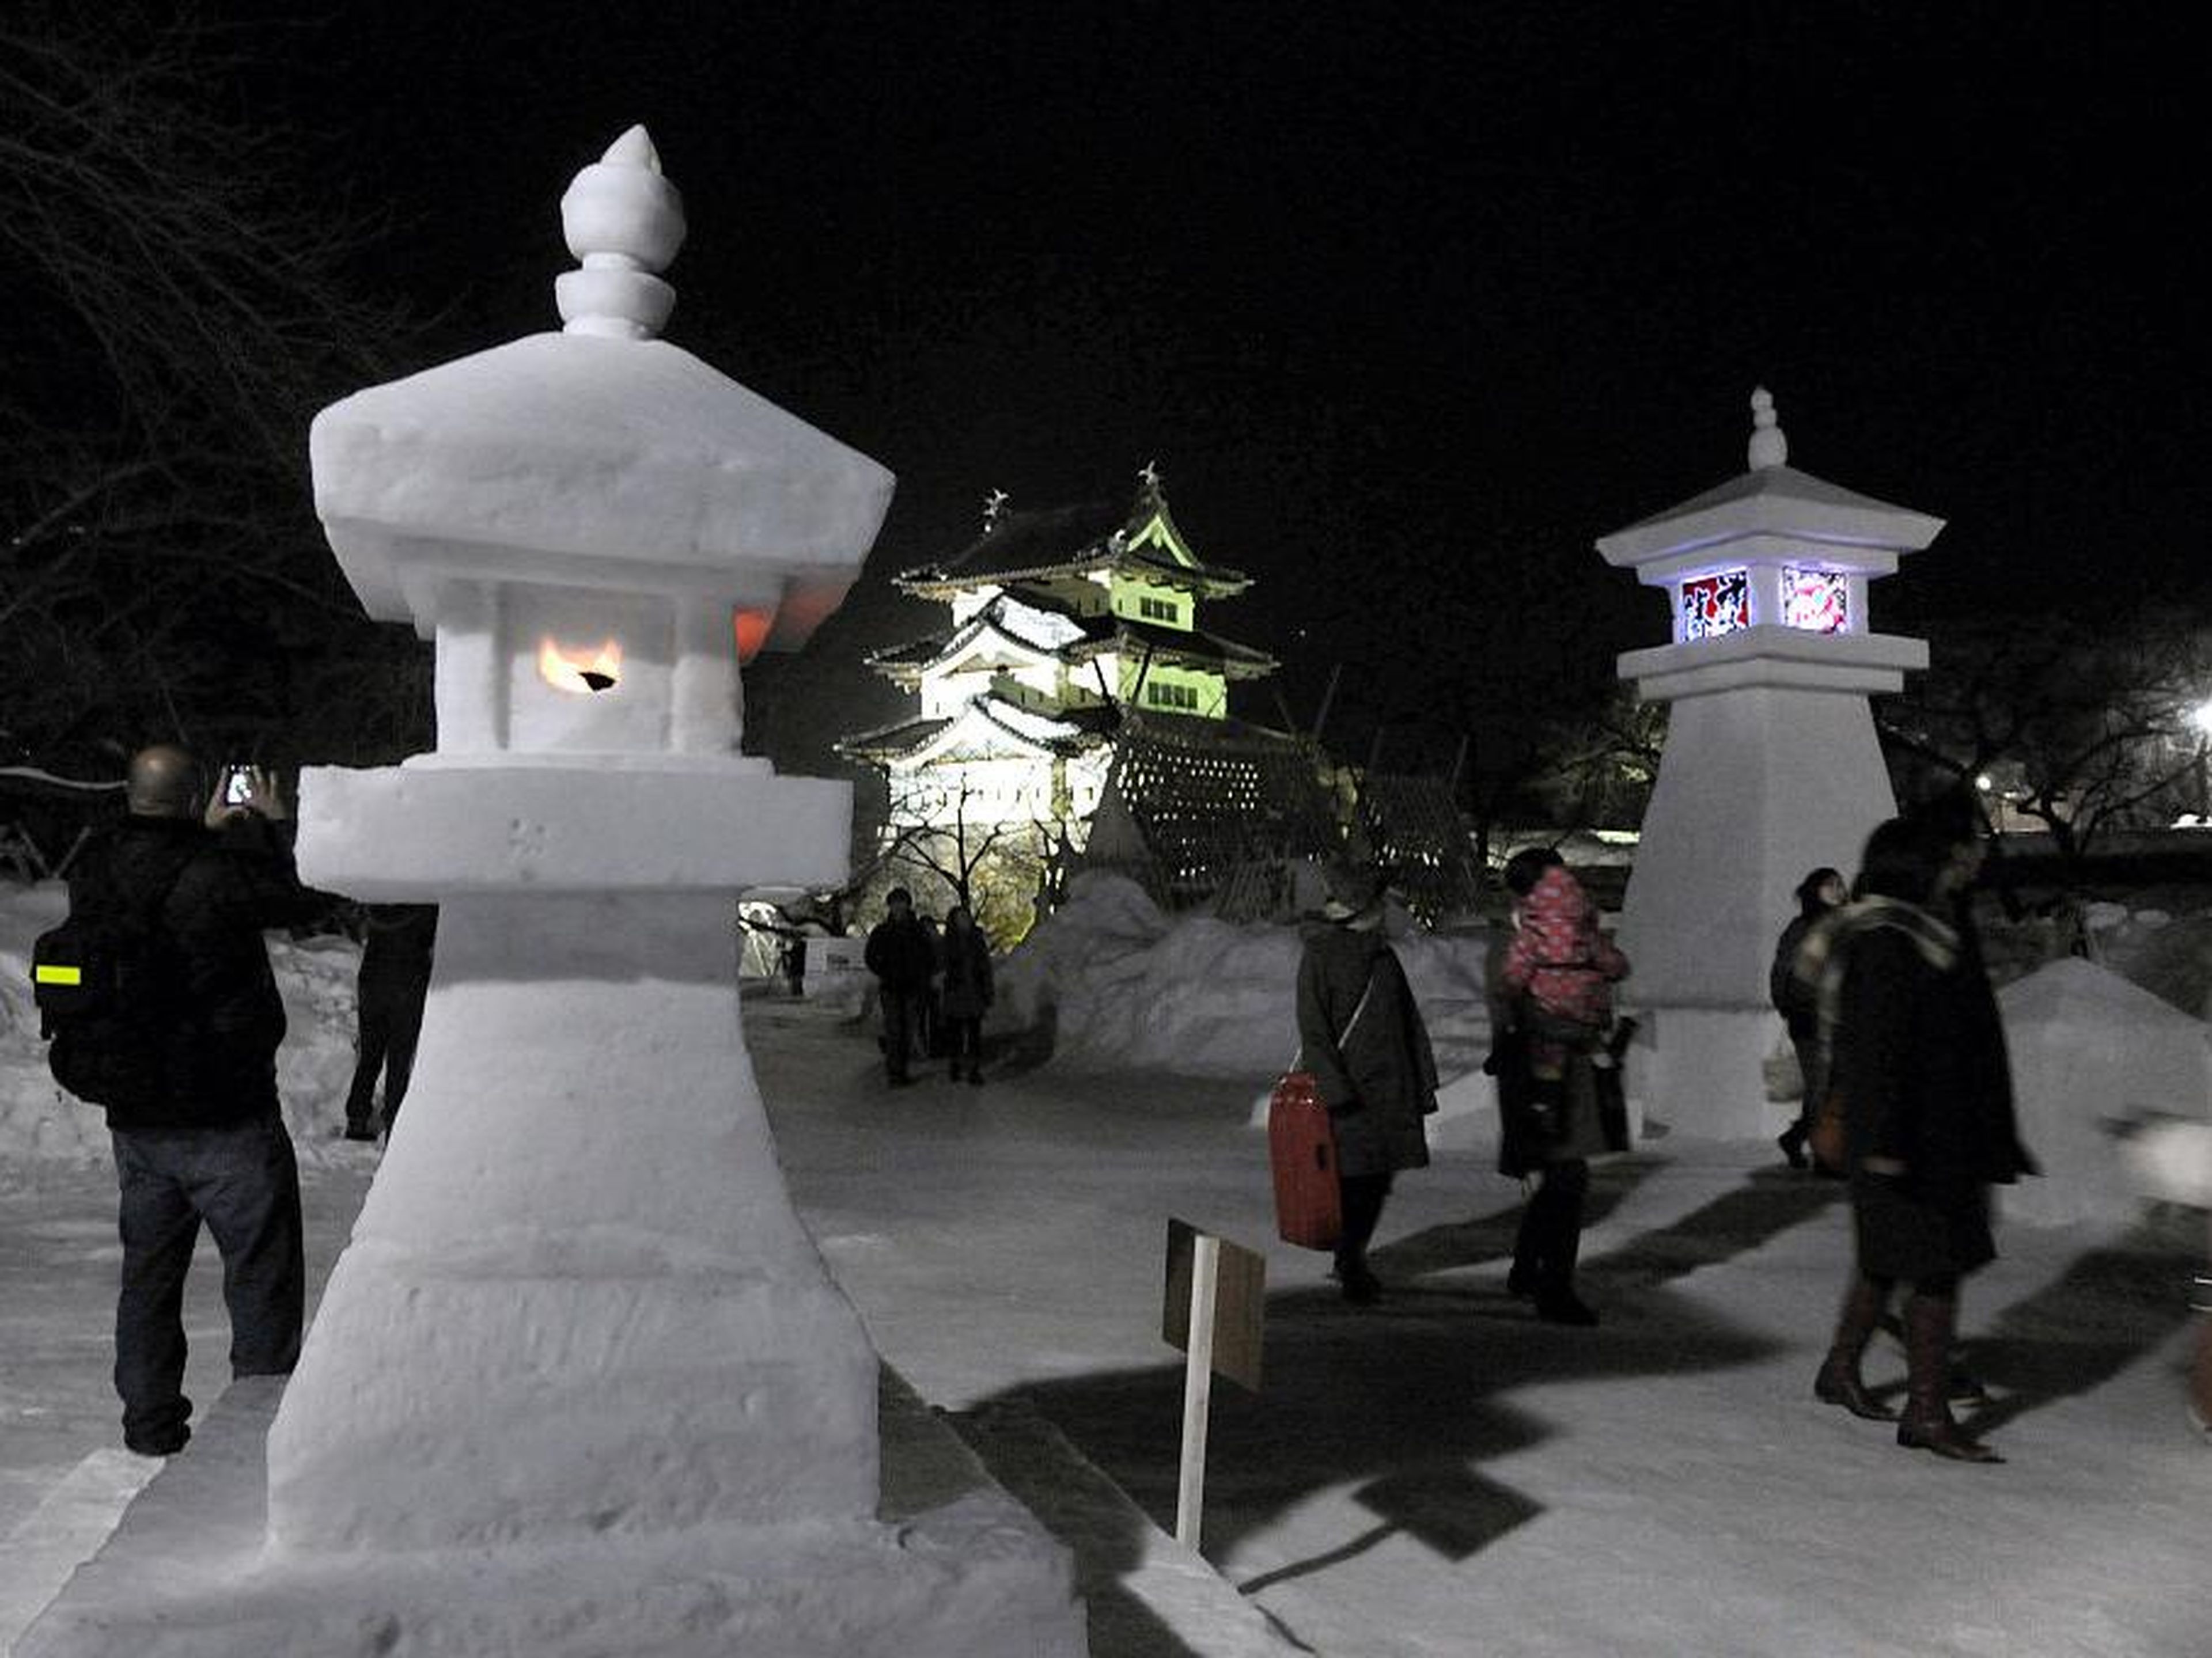 There's even the Hirosaki Castle Yuki-Doro Festival, which brings people to the castle to walk through a display of lights and lanterns made out of snow.